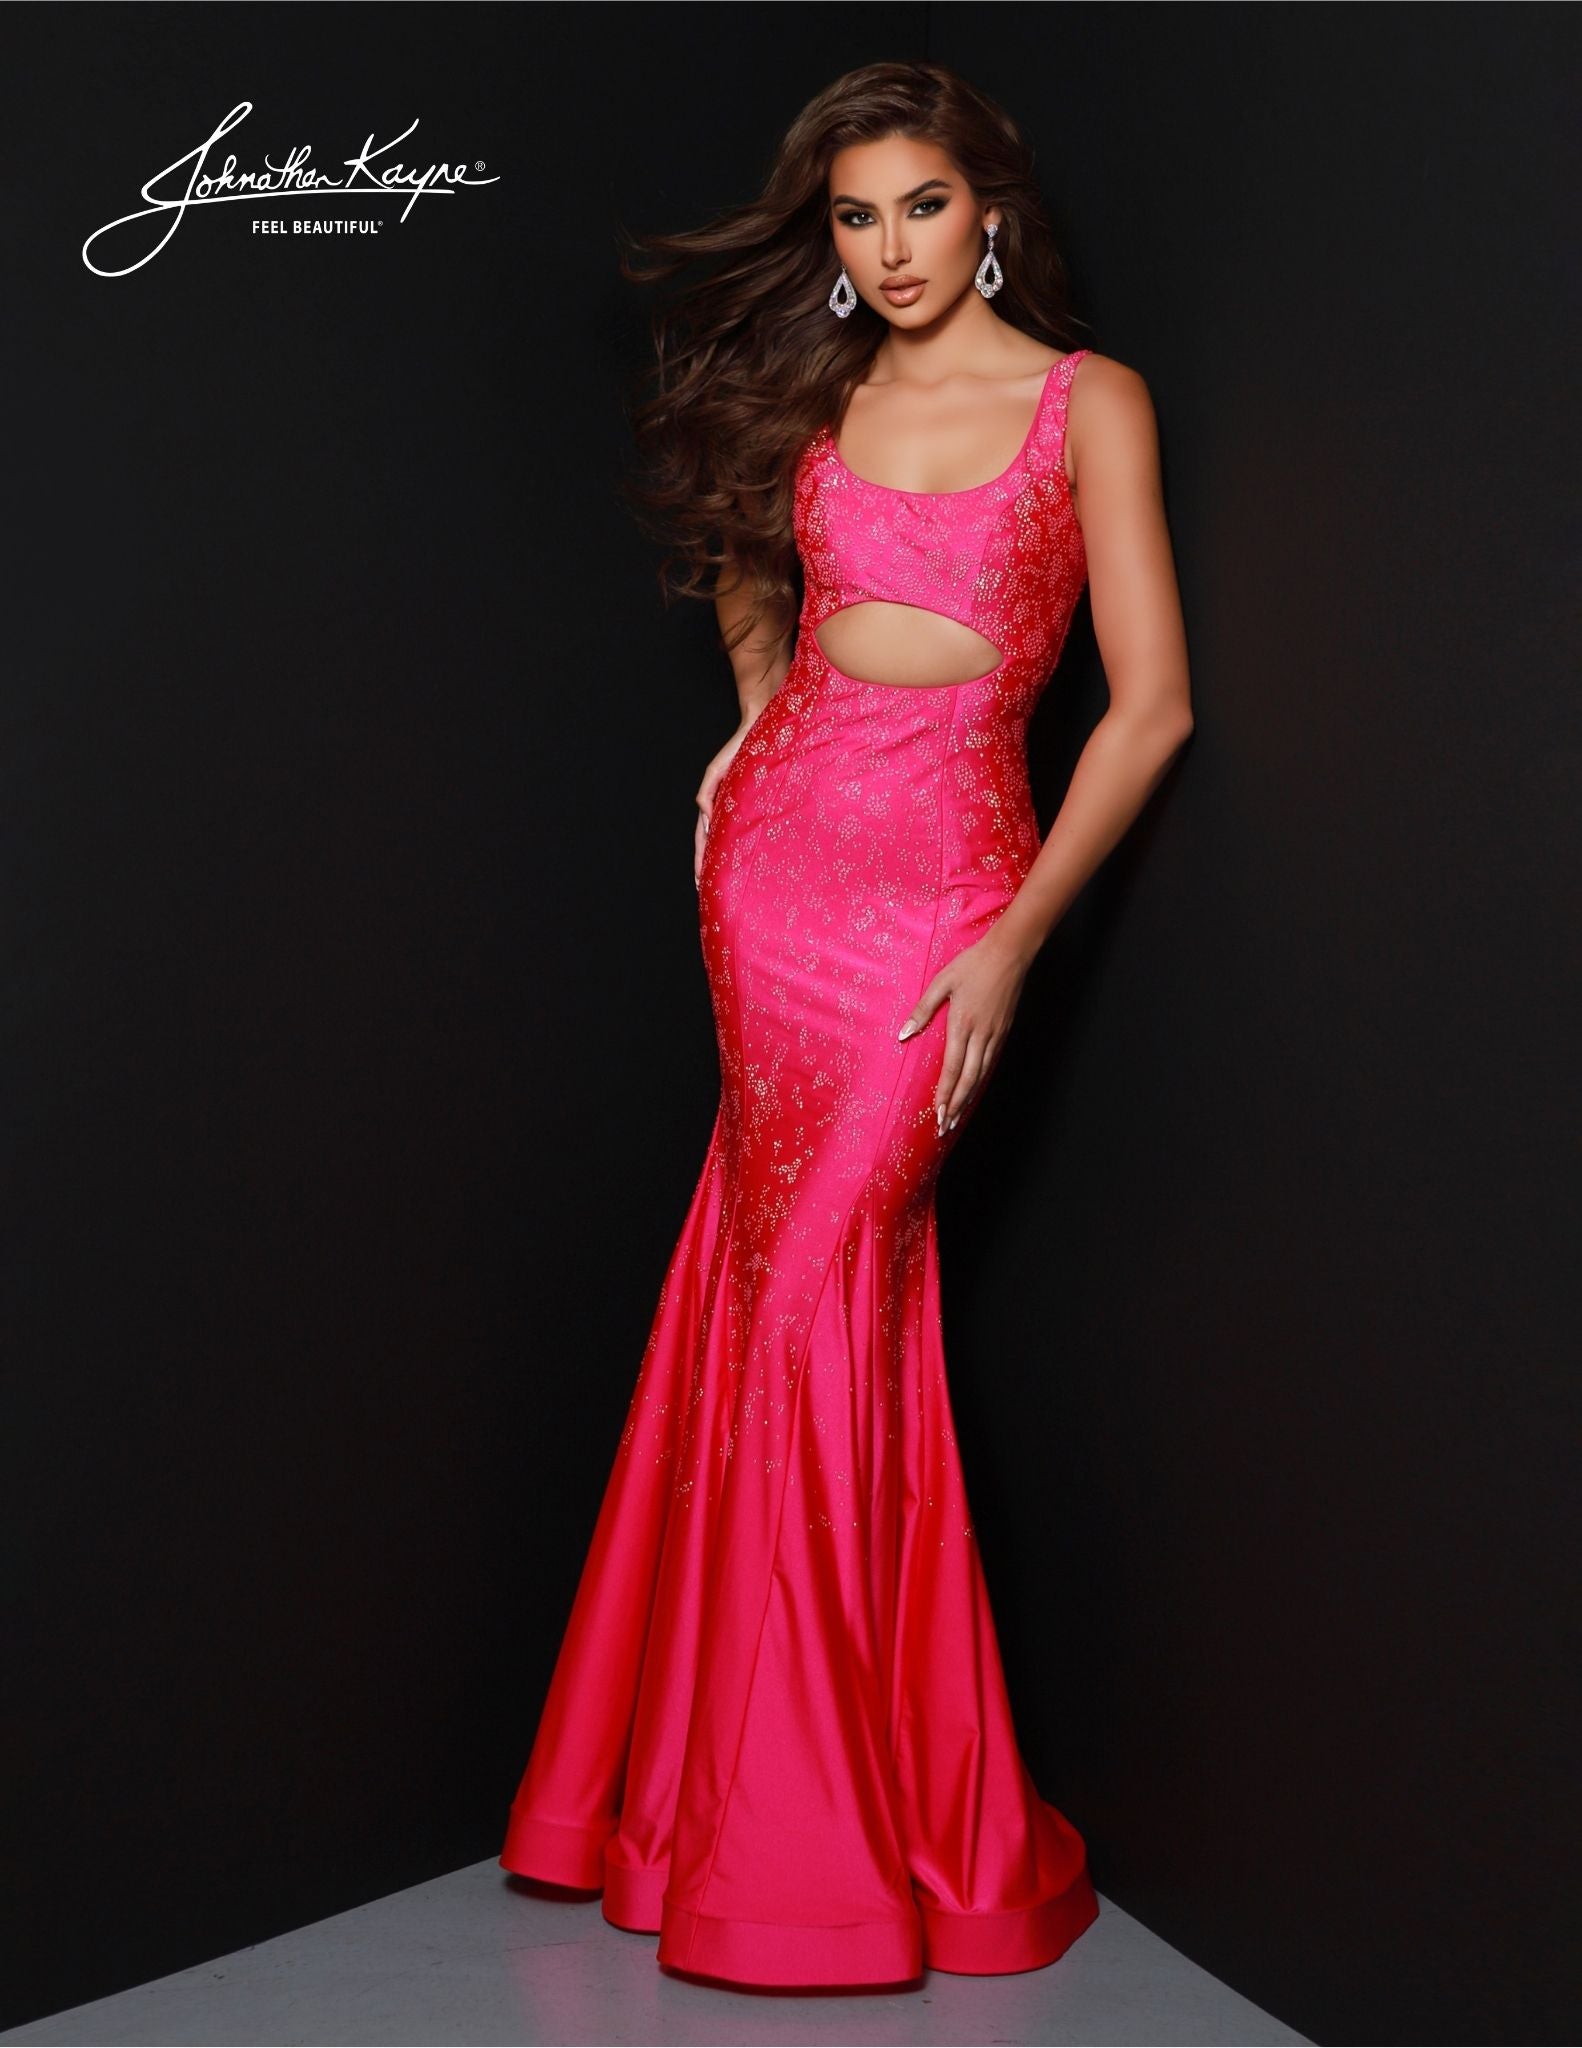 The Johnathan Kayne 2806 Prom Dress is a stunning and sophisticated formal gown. Its scoop neck bodice and mermaid silhouette create a timeless and graceful look. The delicate cutouts keep this classic look modern and chic. Enjoy partying in style this season with this amazing formal gown. Dazzle and mesmerize! This 4 Way Stretch Lycra gown features a bodice cutout that is designed to leave a lasting impression. 